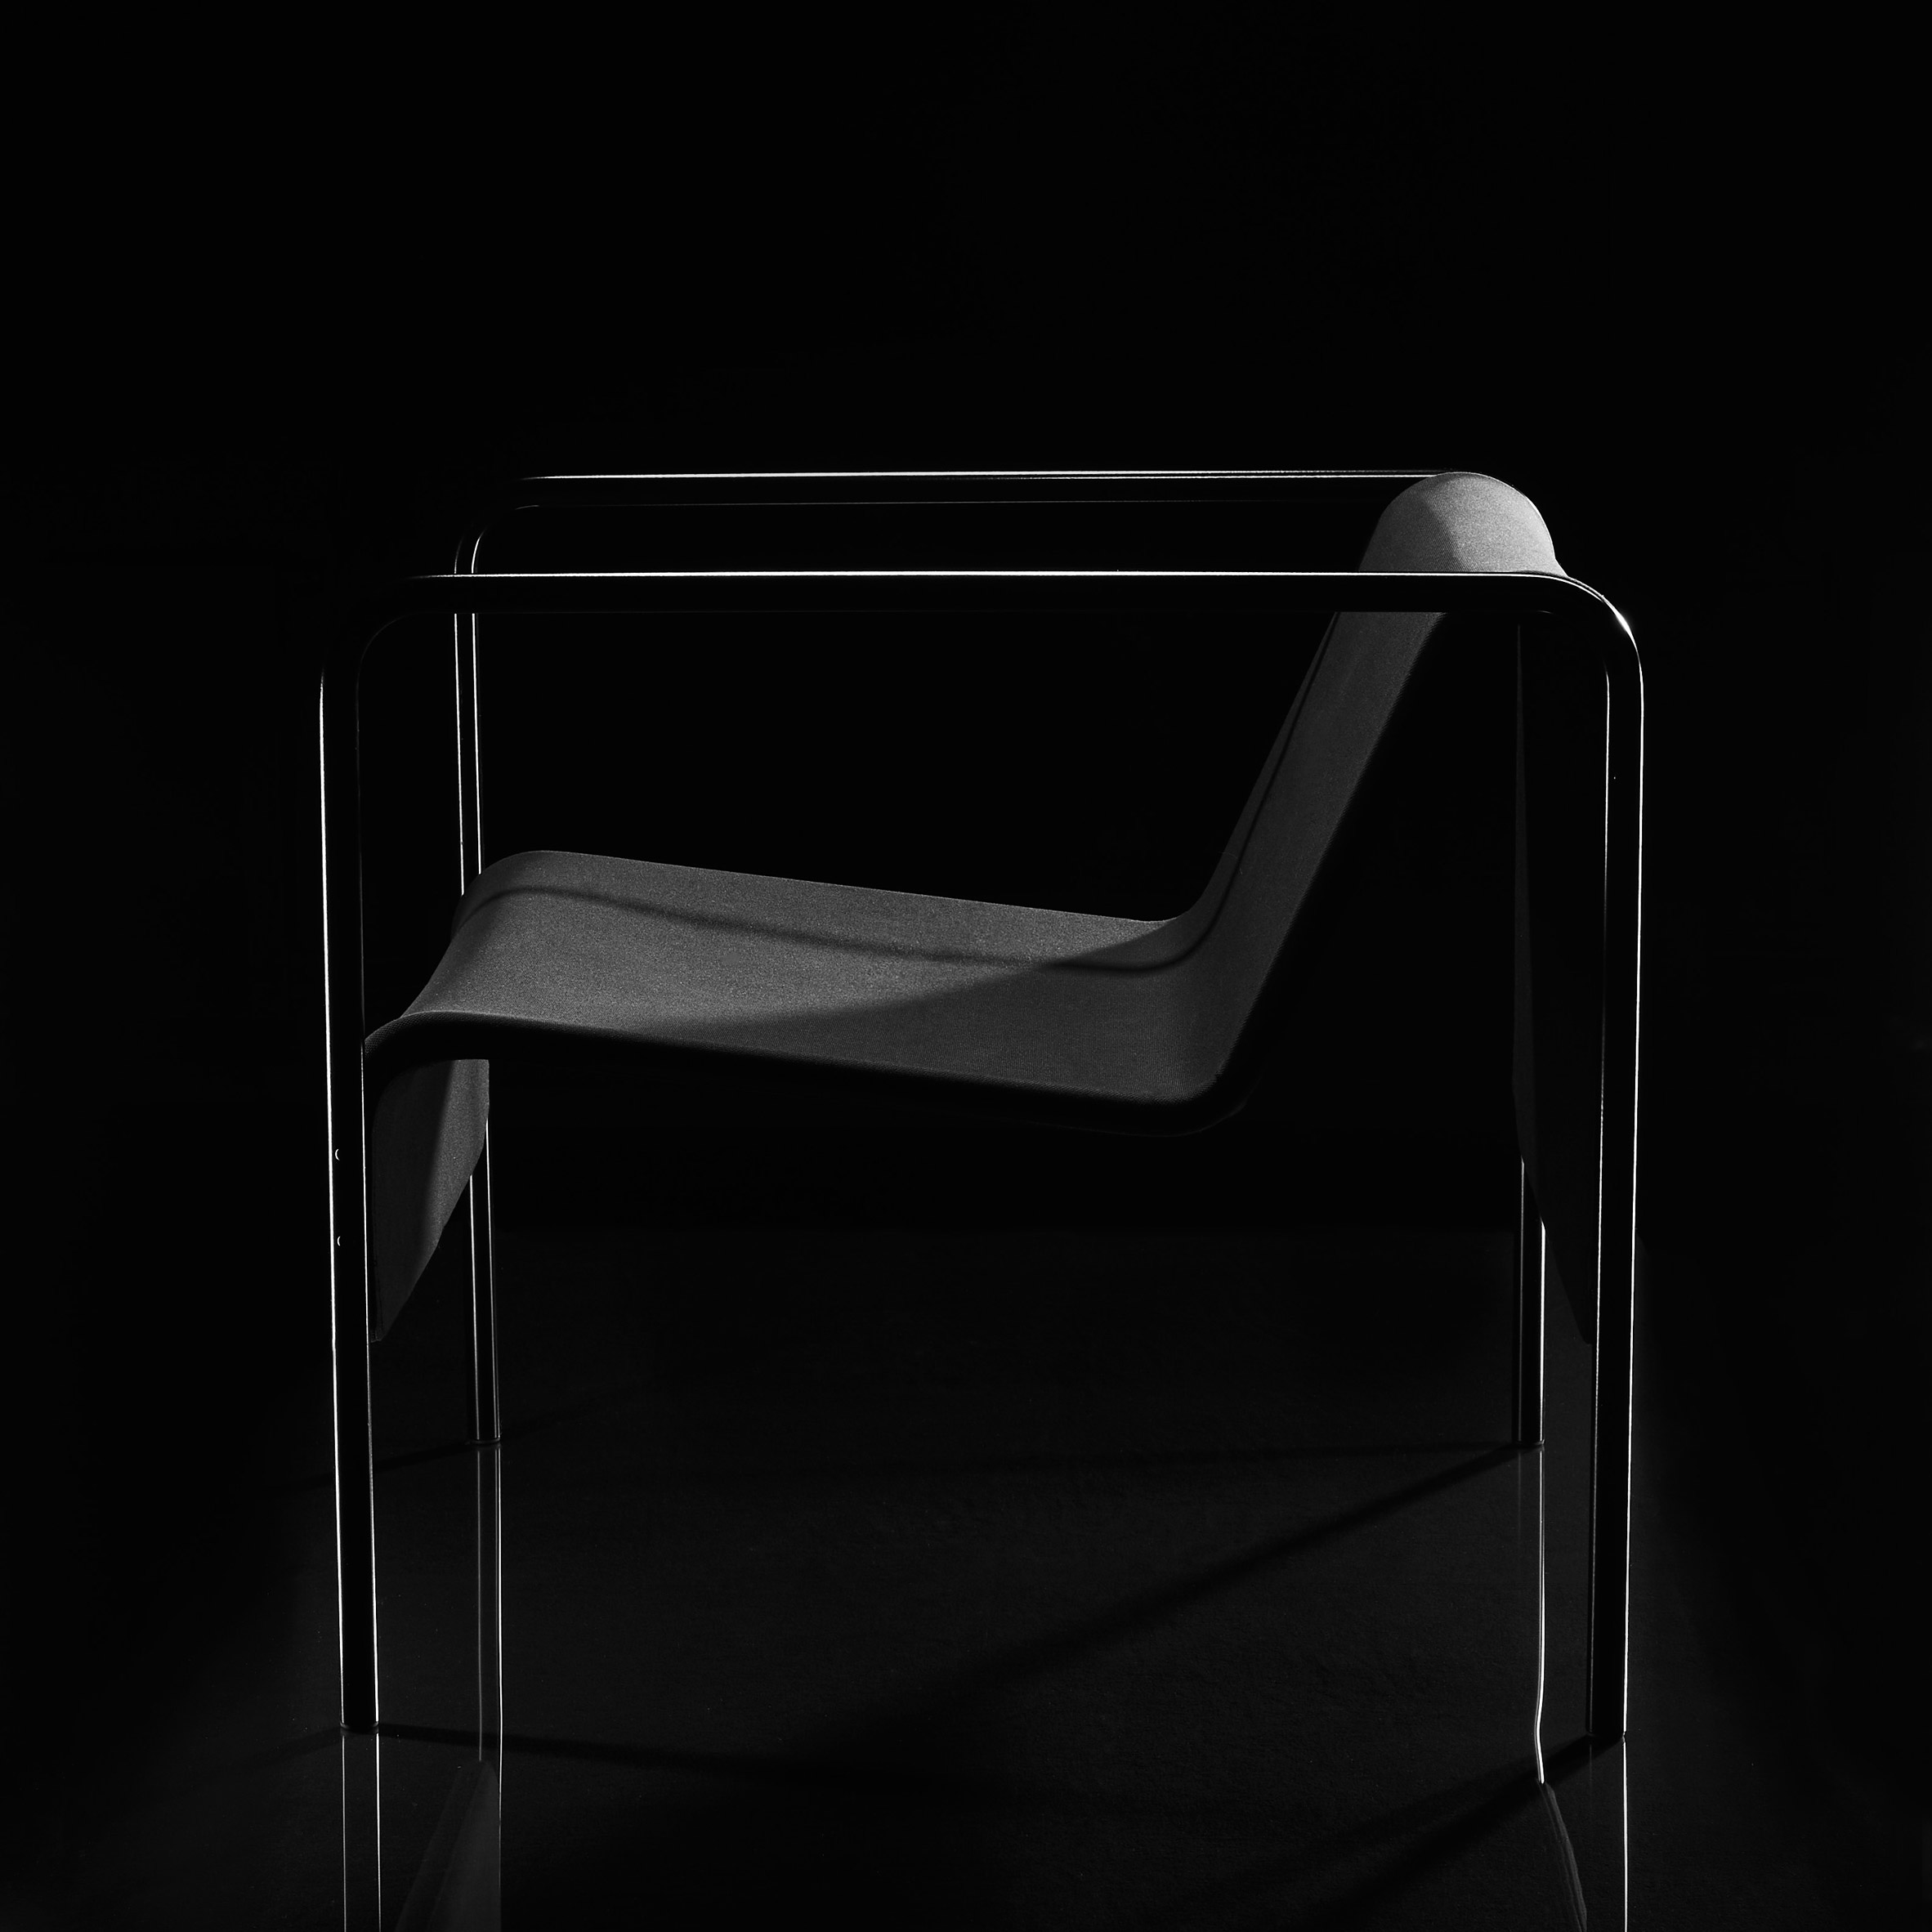 A photo of a chair designed by the Swedish House Mafia